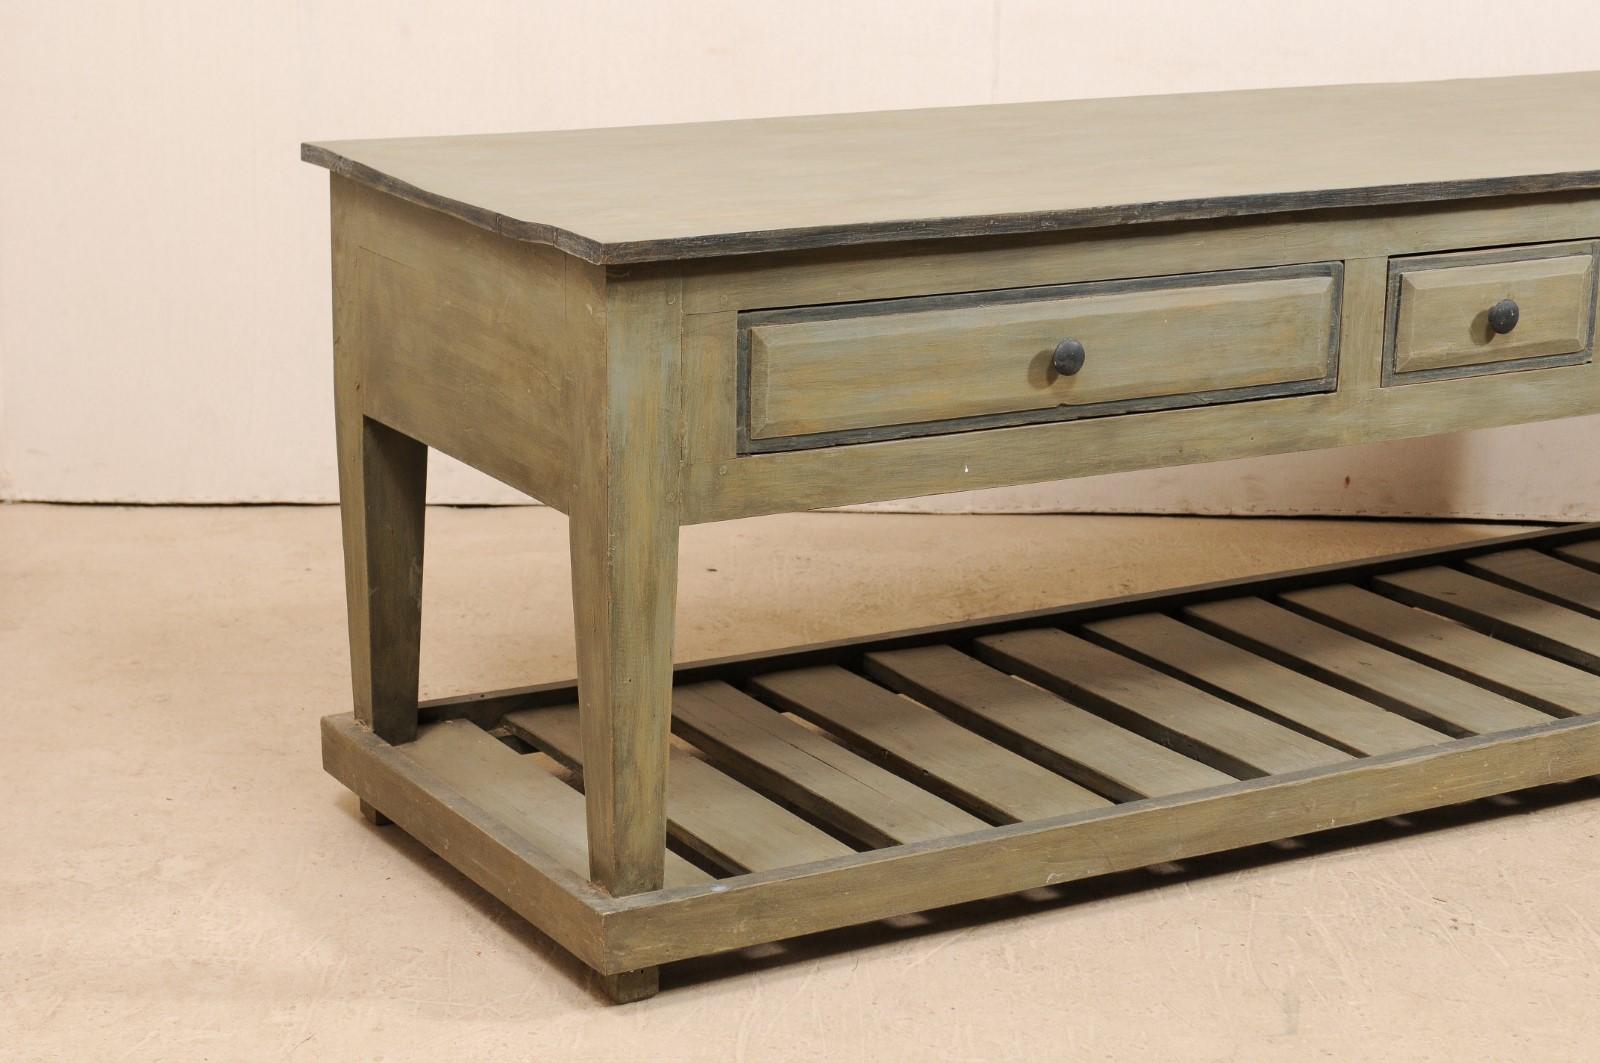 Carved Impressive Custom Painted Wood Kitchen Island Table with Storage